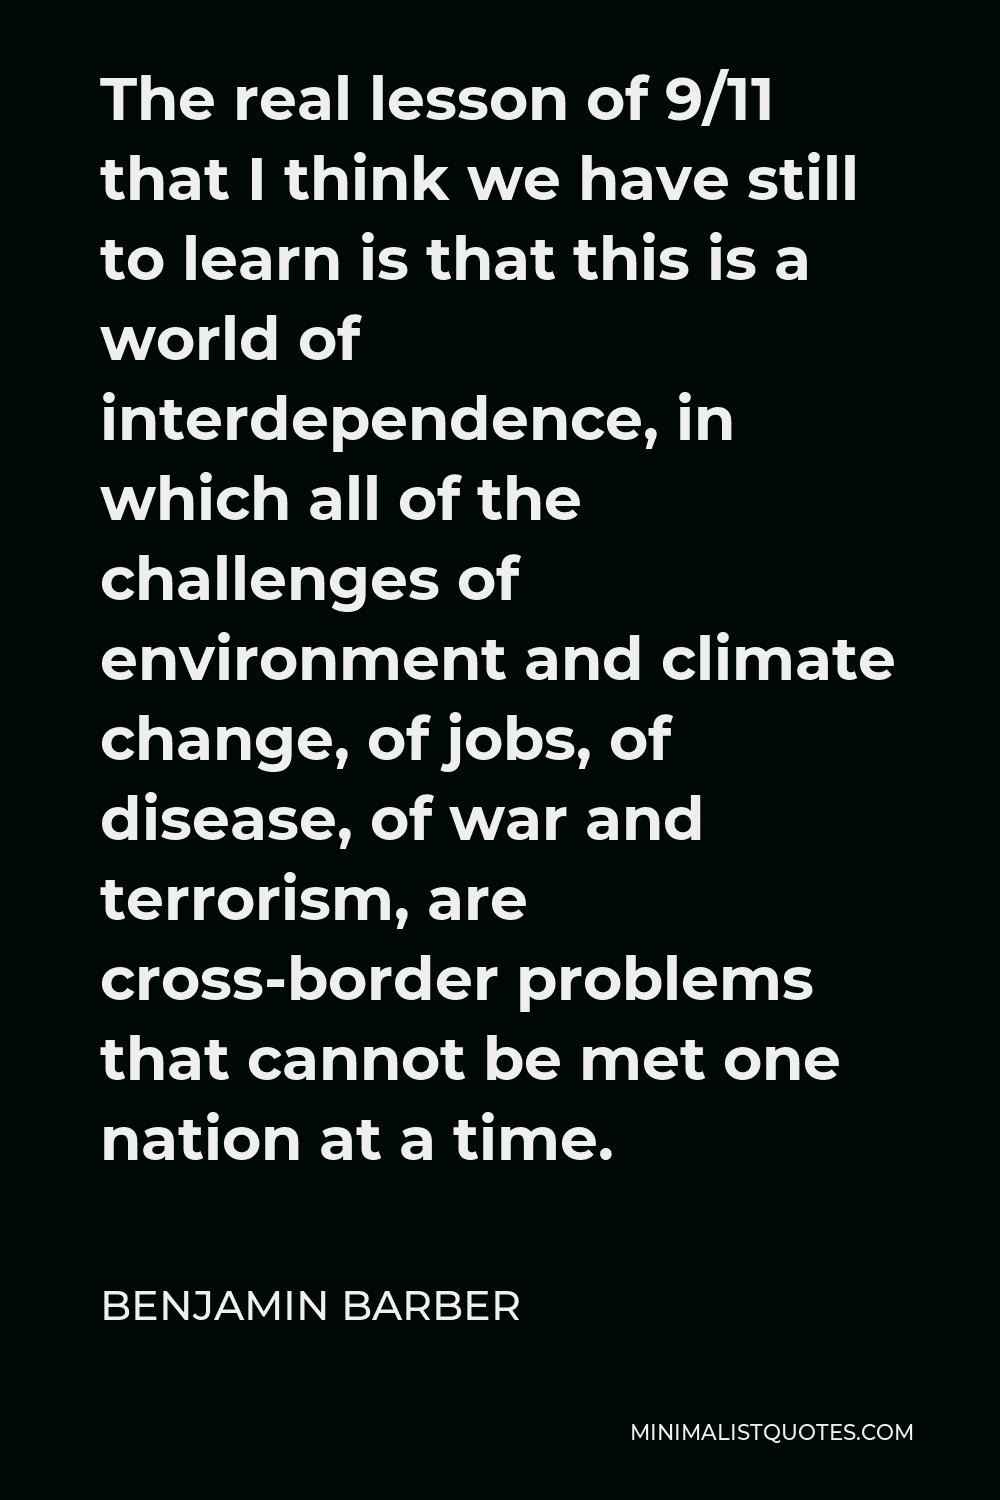 Benjamin Barber Quote - The real lesson of 9/11 that I think we have still to learn is that this is a world of interdependence, in which all of the challenges of environment and climate change, of jobs, of disease, of war and terrorism, are cross-border problems that cannot be met one nation at a time.